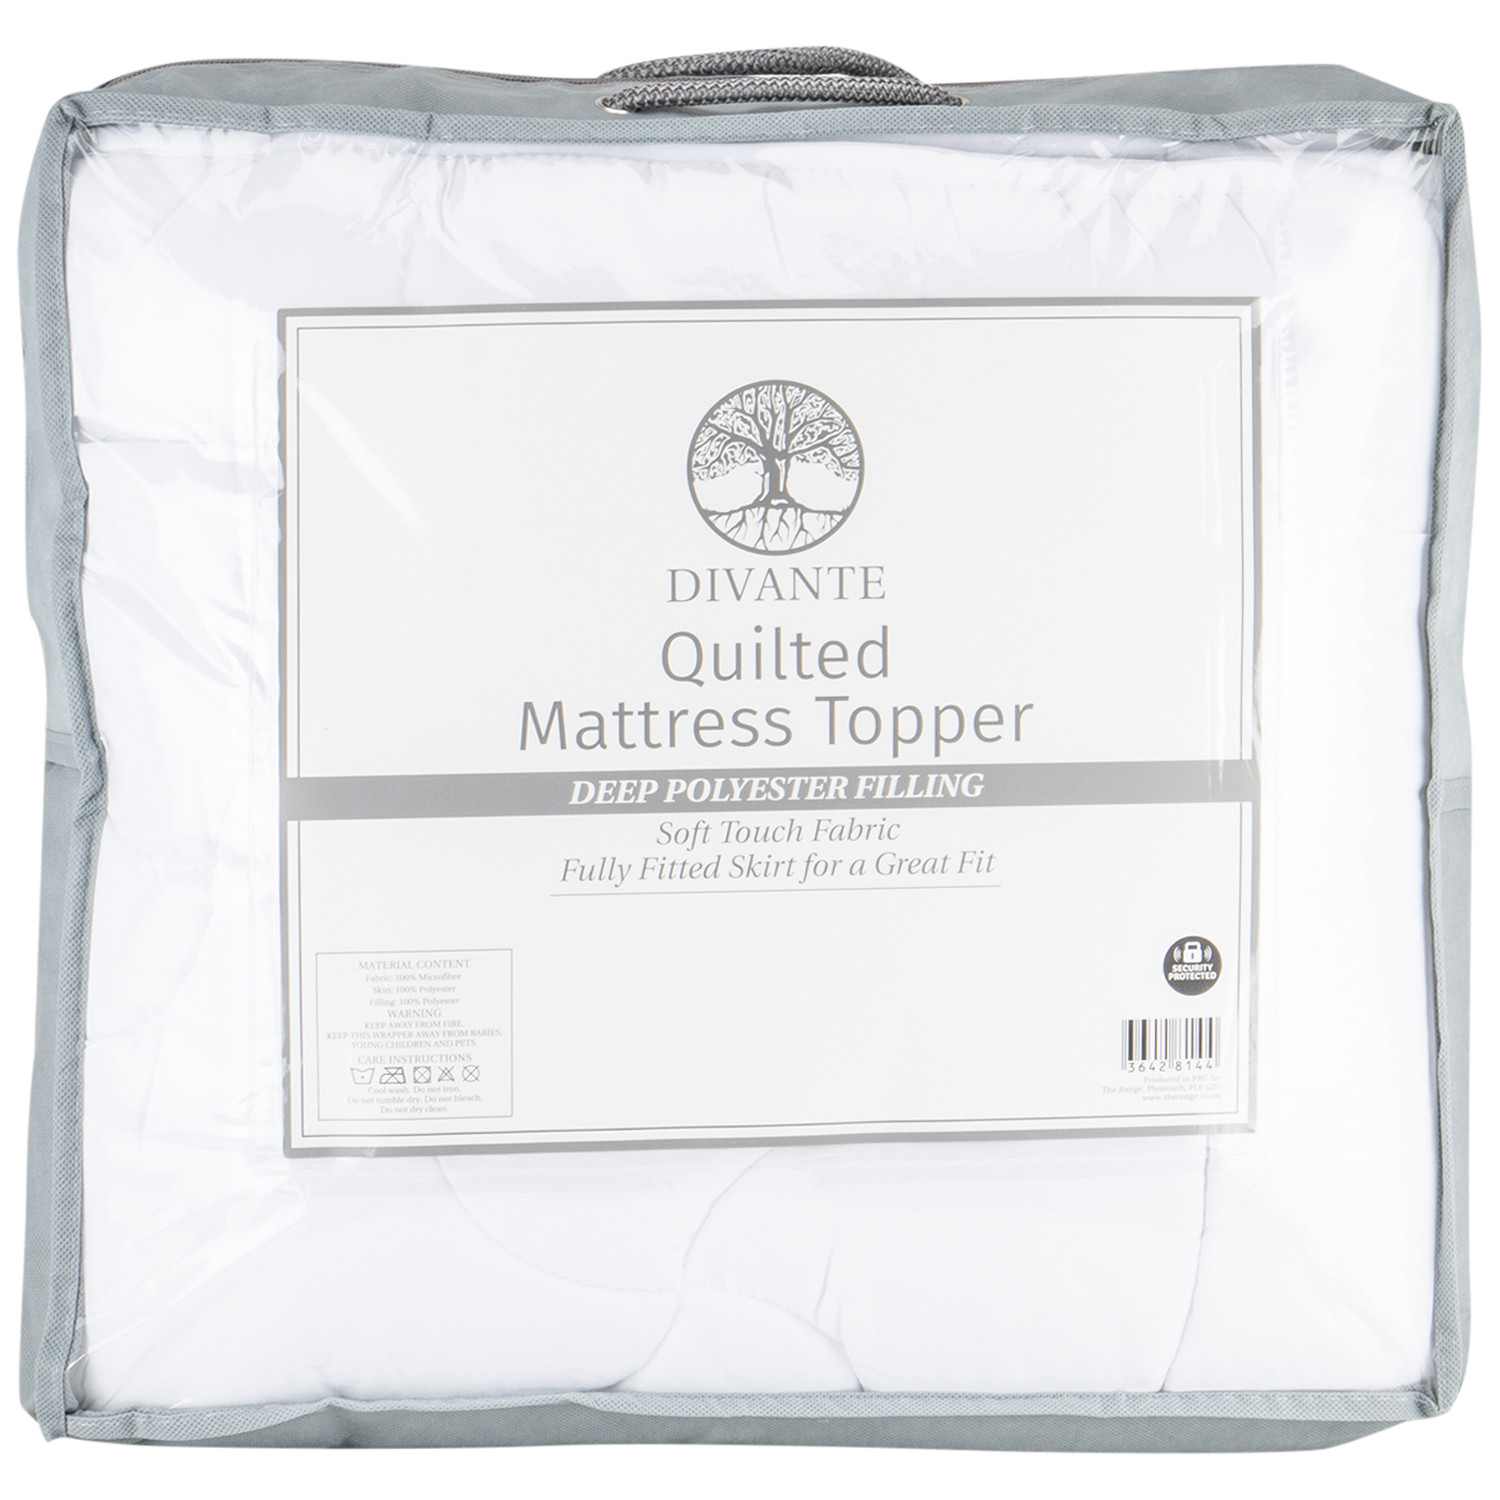 Divante Single Quilted Mattress Topper Image